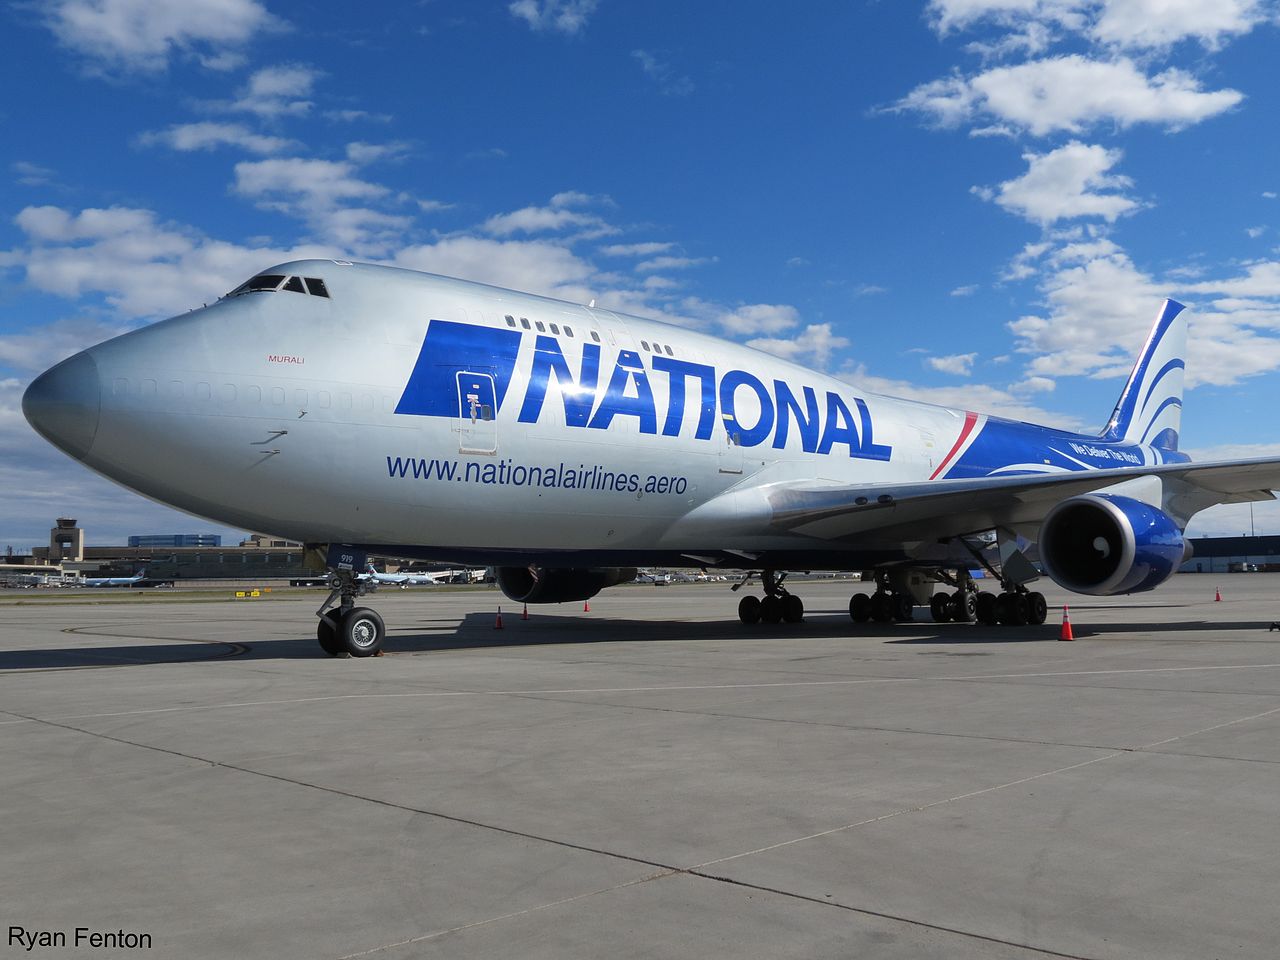 Photo: National Airlines B747-400F. Photo Credit: RAF-YYC from Calgary, Canada, CC BY-SA 2.0, via Wikimedia Commons